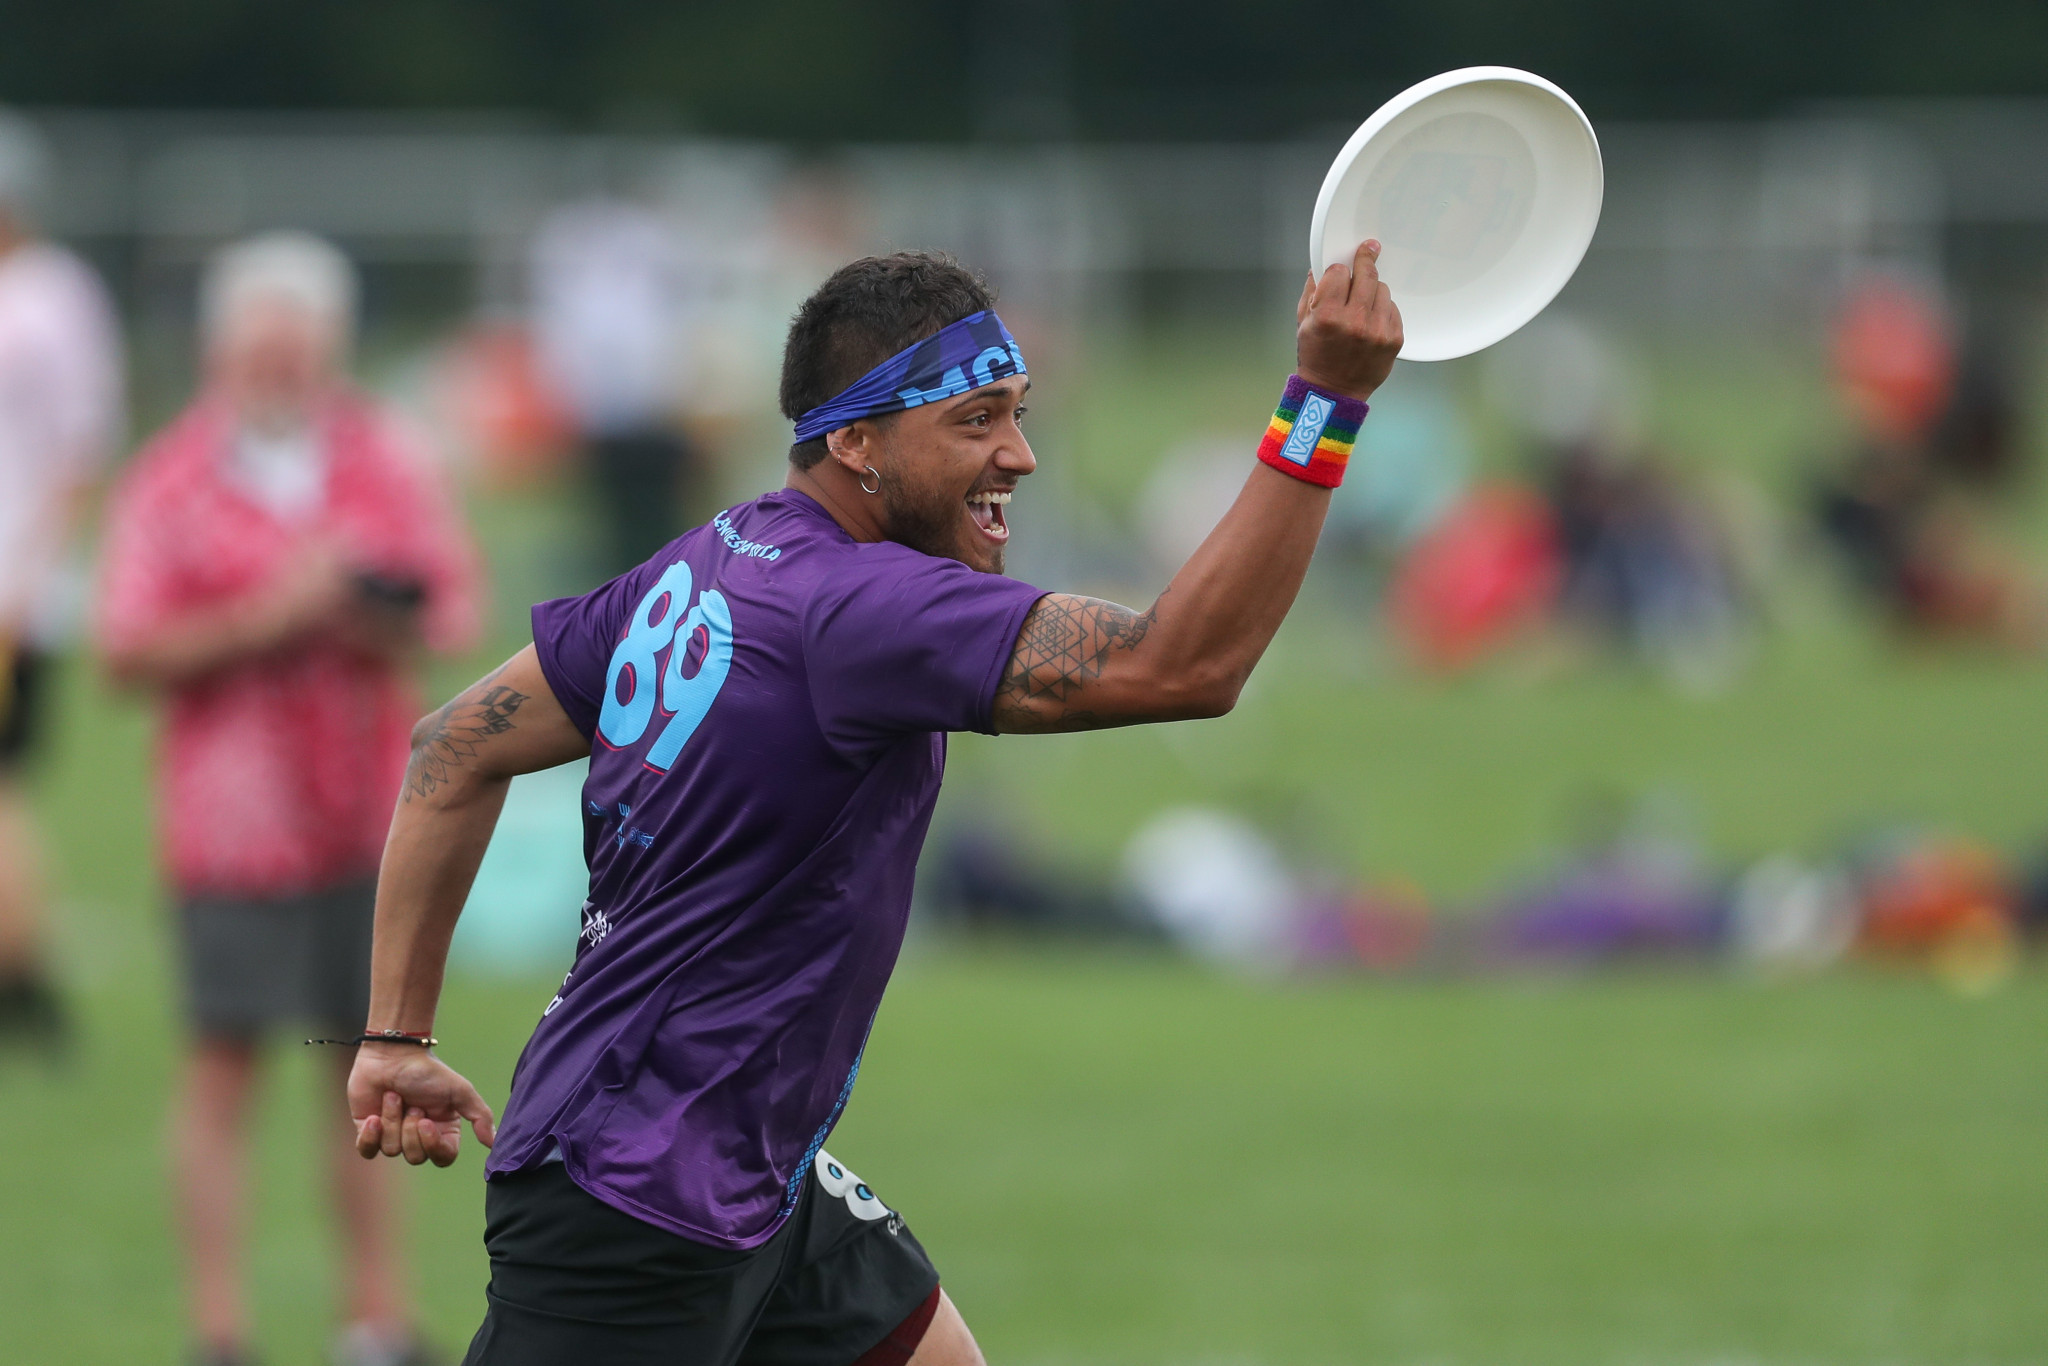 Mixed team pools conclude on day four of World Ultimate Club Championships